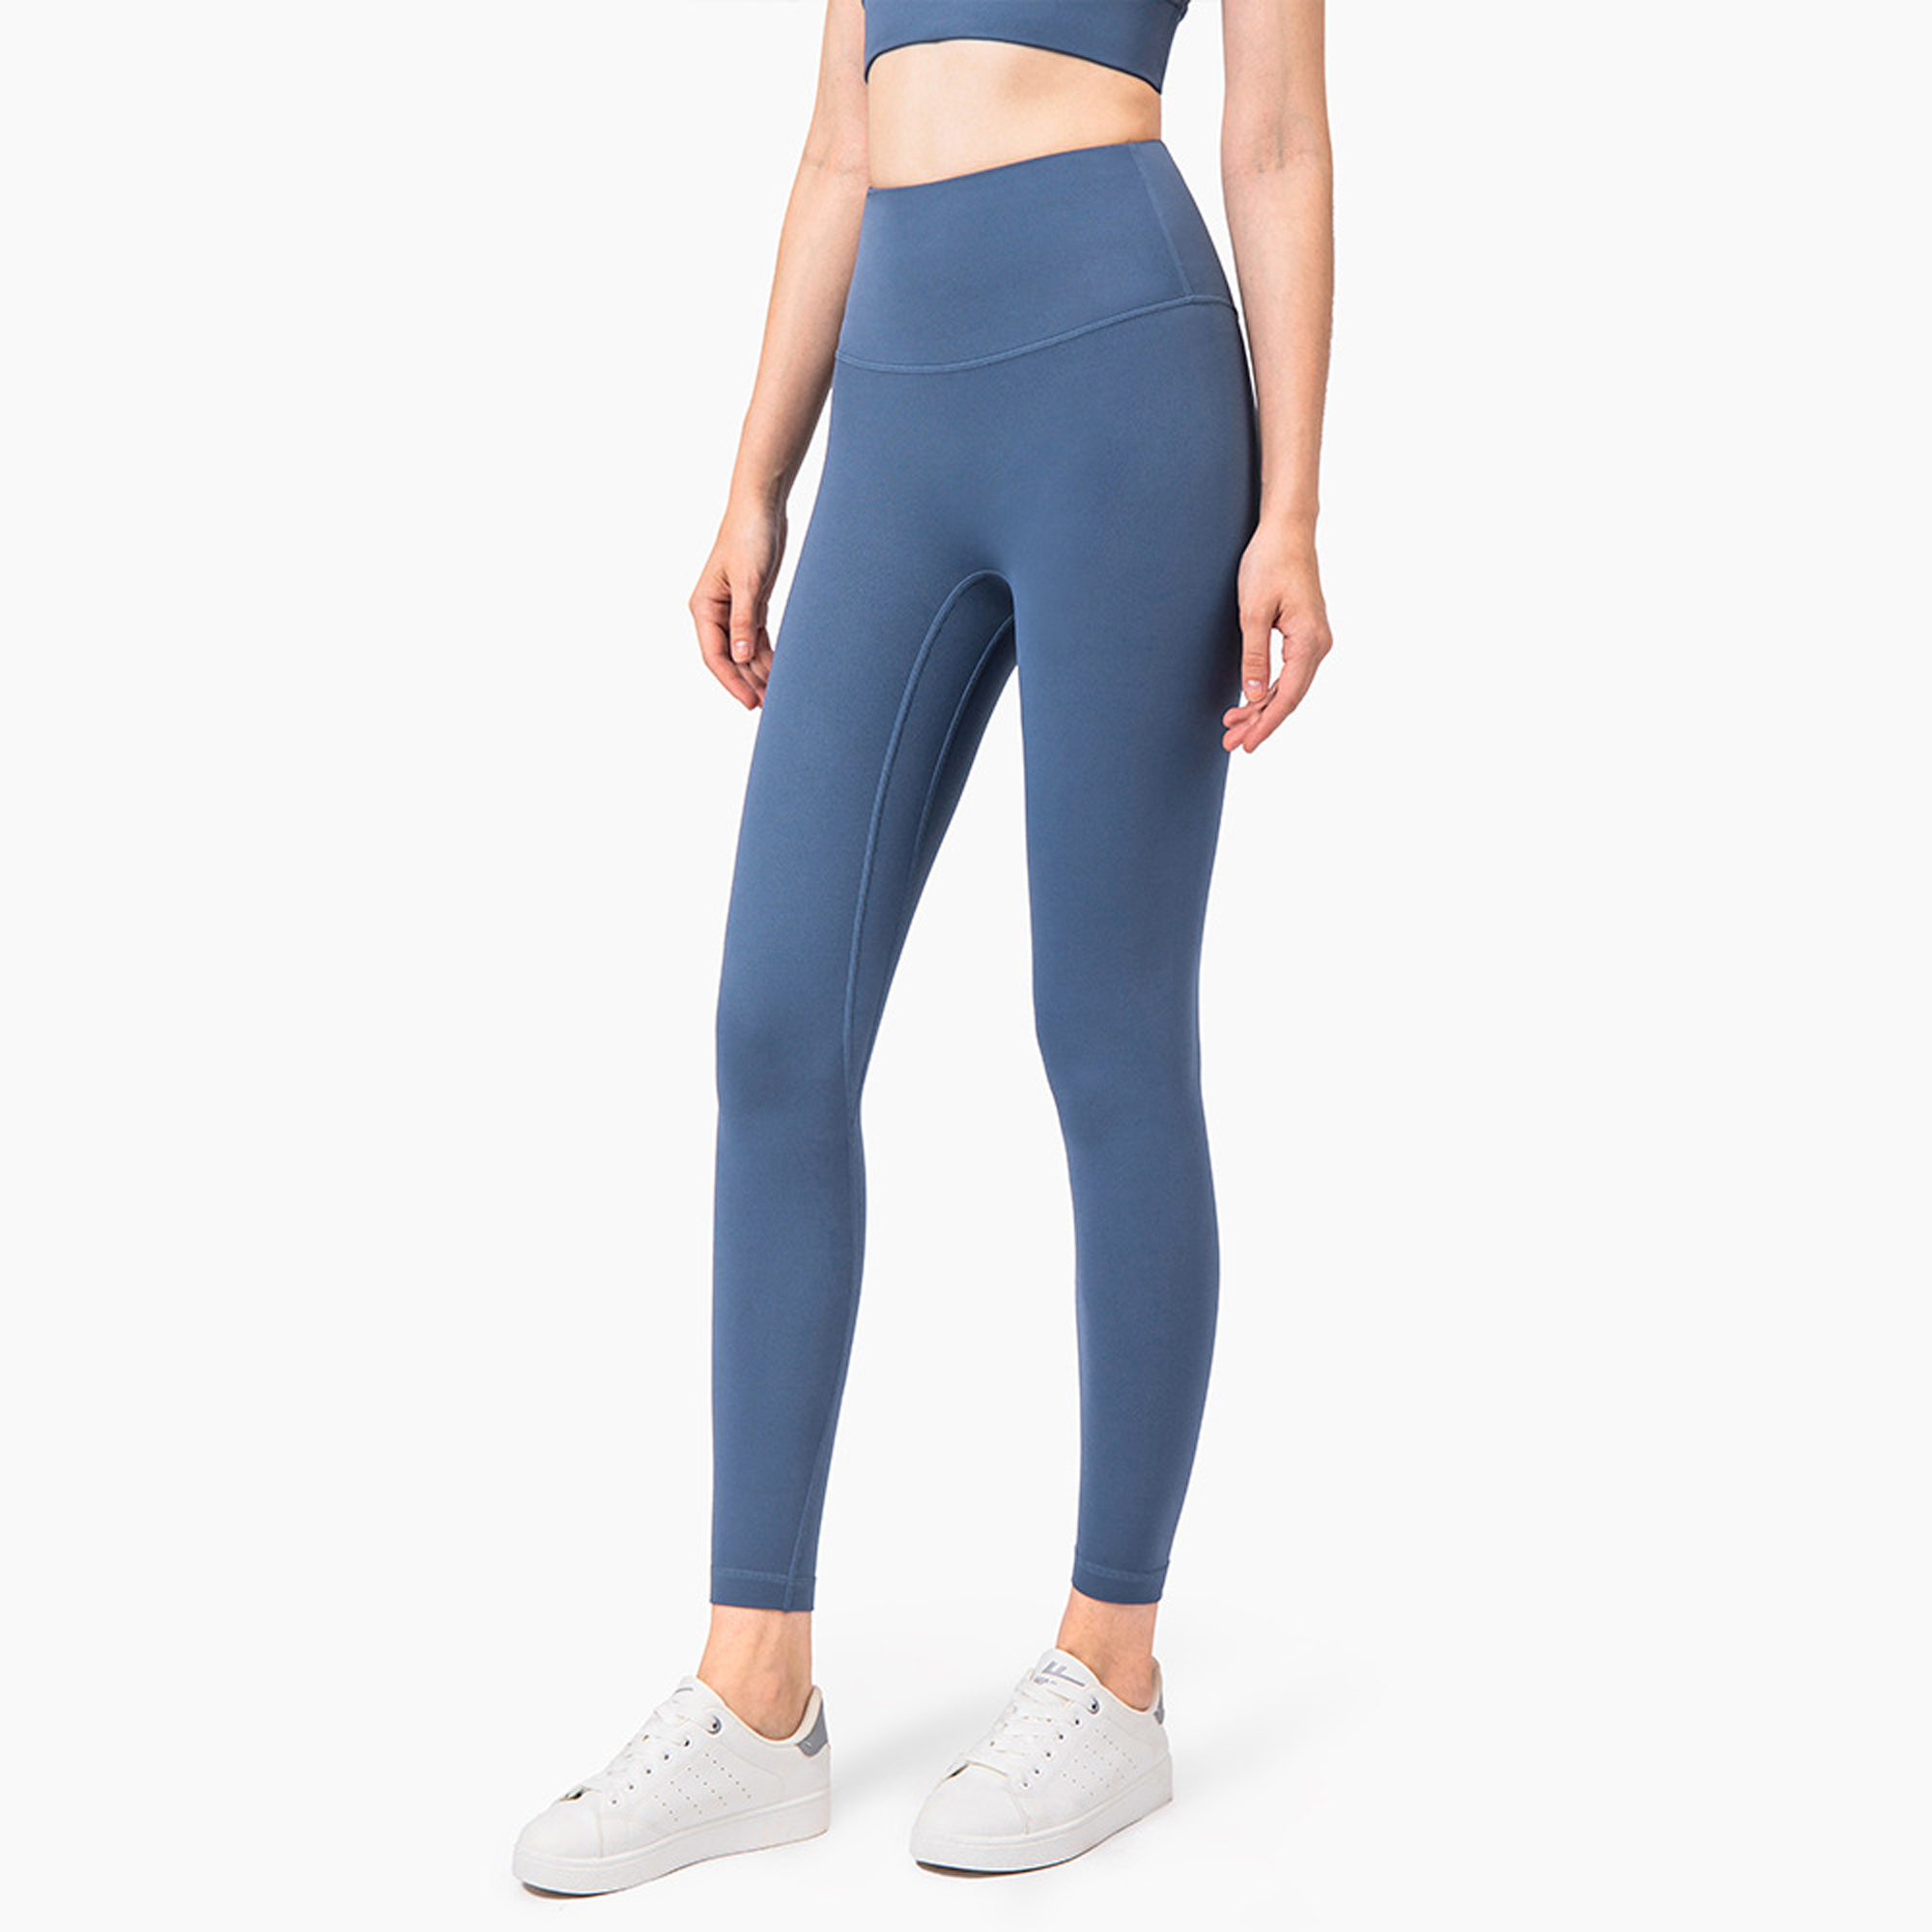 Women's High Waist Bodybuilding Legging, Best Yoga, Sports, Workout,  Running & Training Leggings for Sale at the Lowest Prices – SHEJOLLY